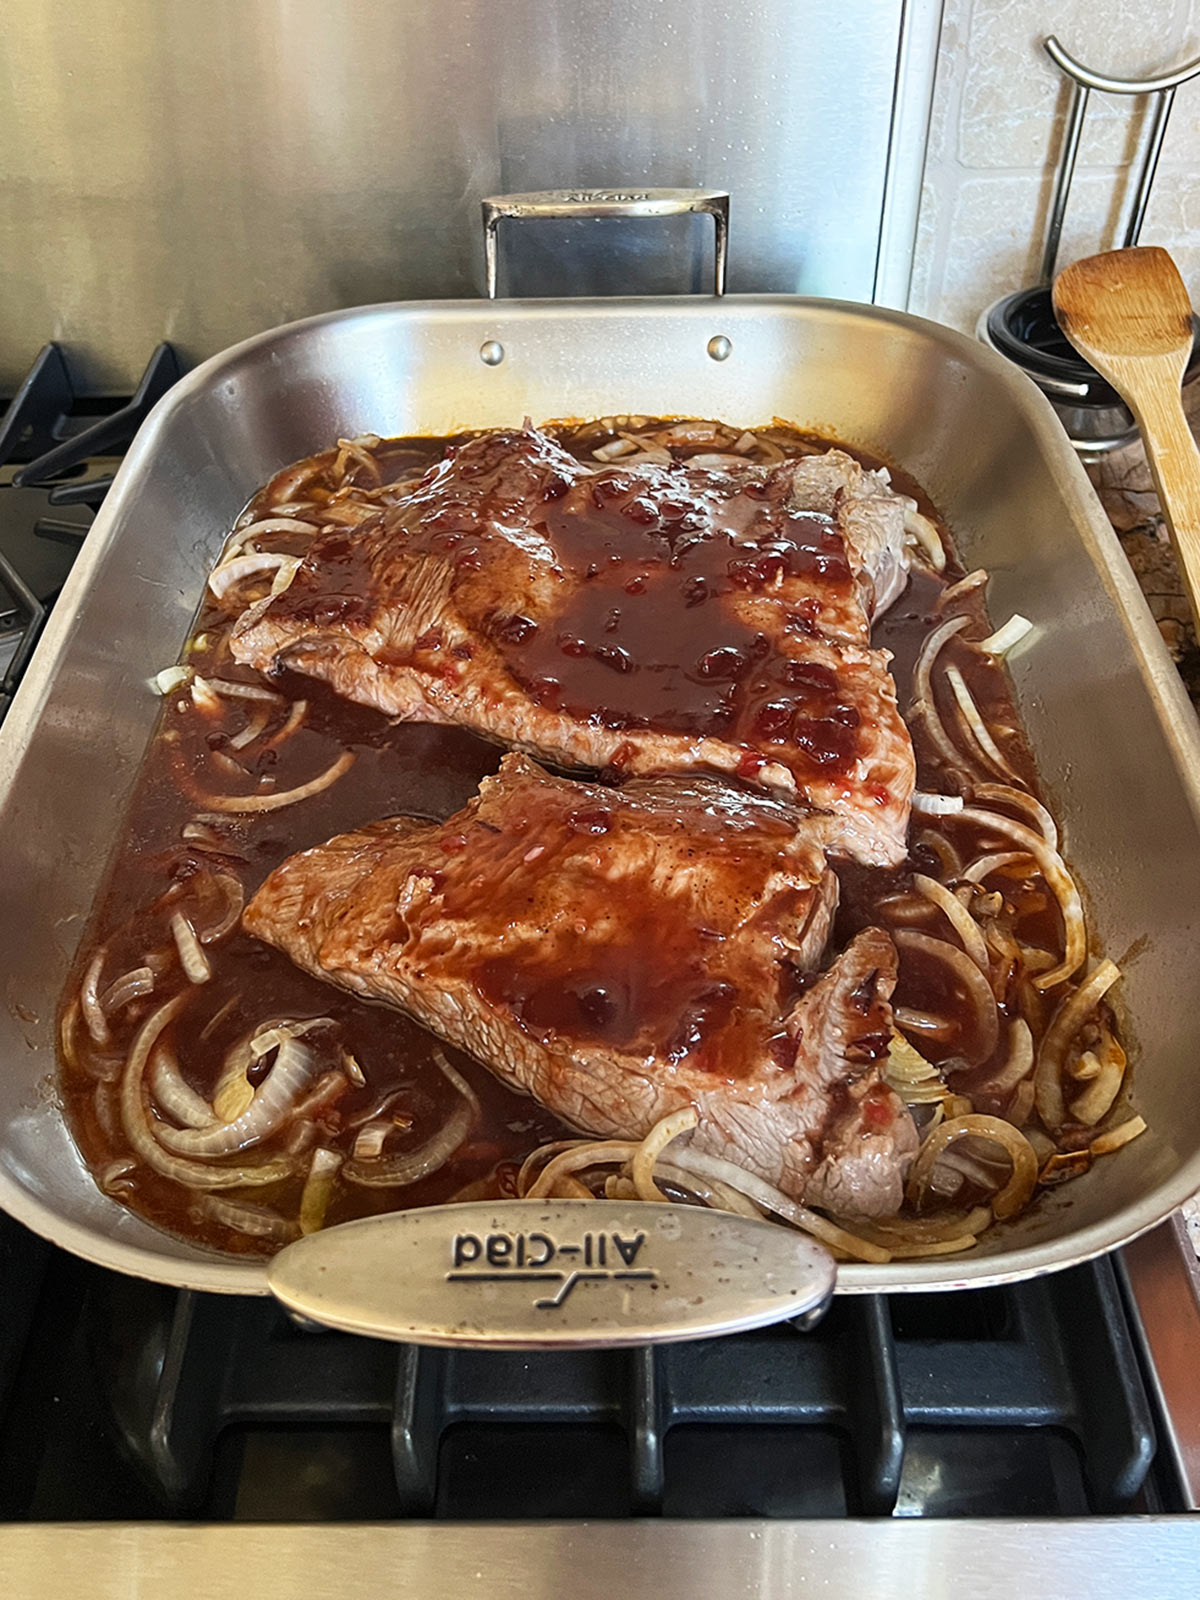 Sauce poured over the brisket in the roasting pan and ready to go in the oven.